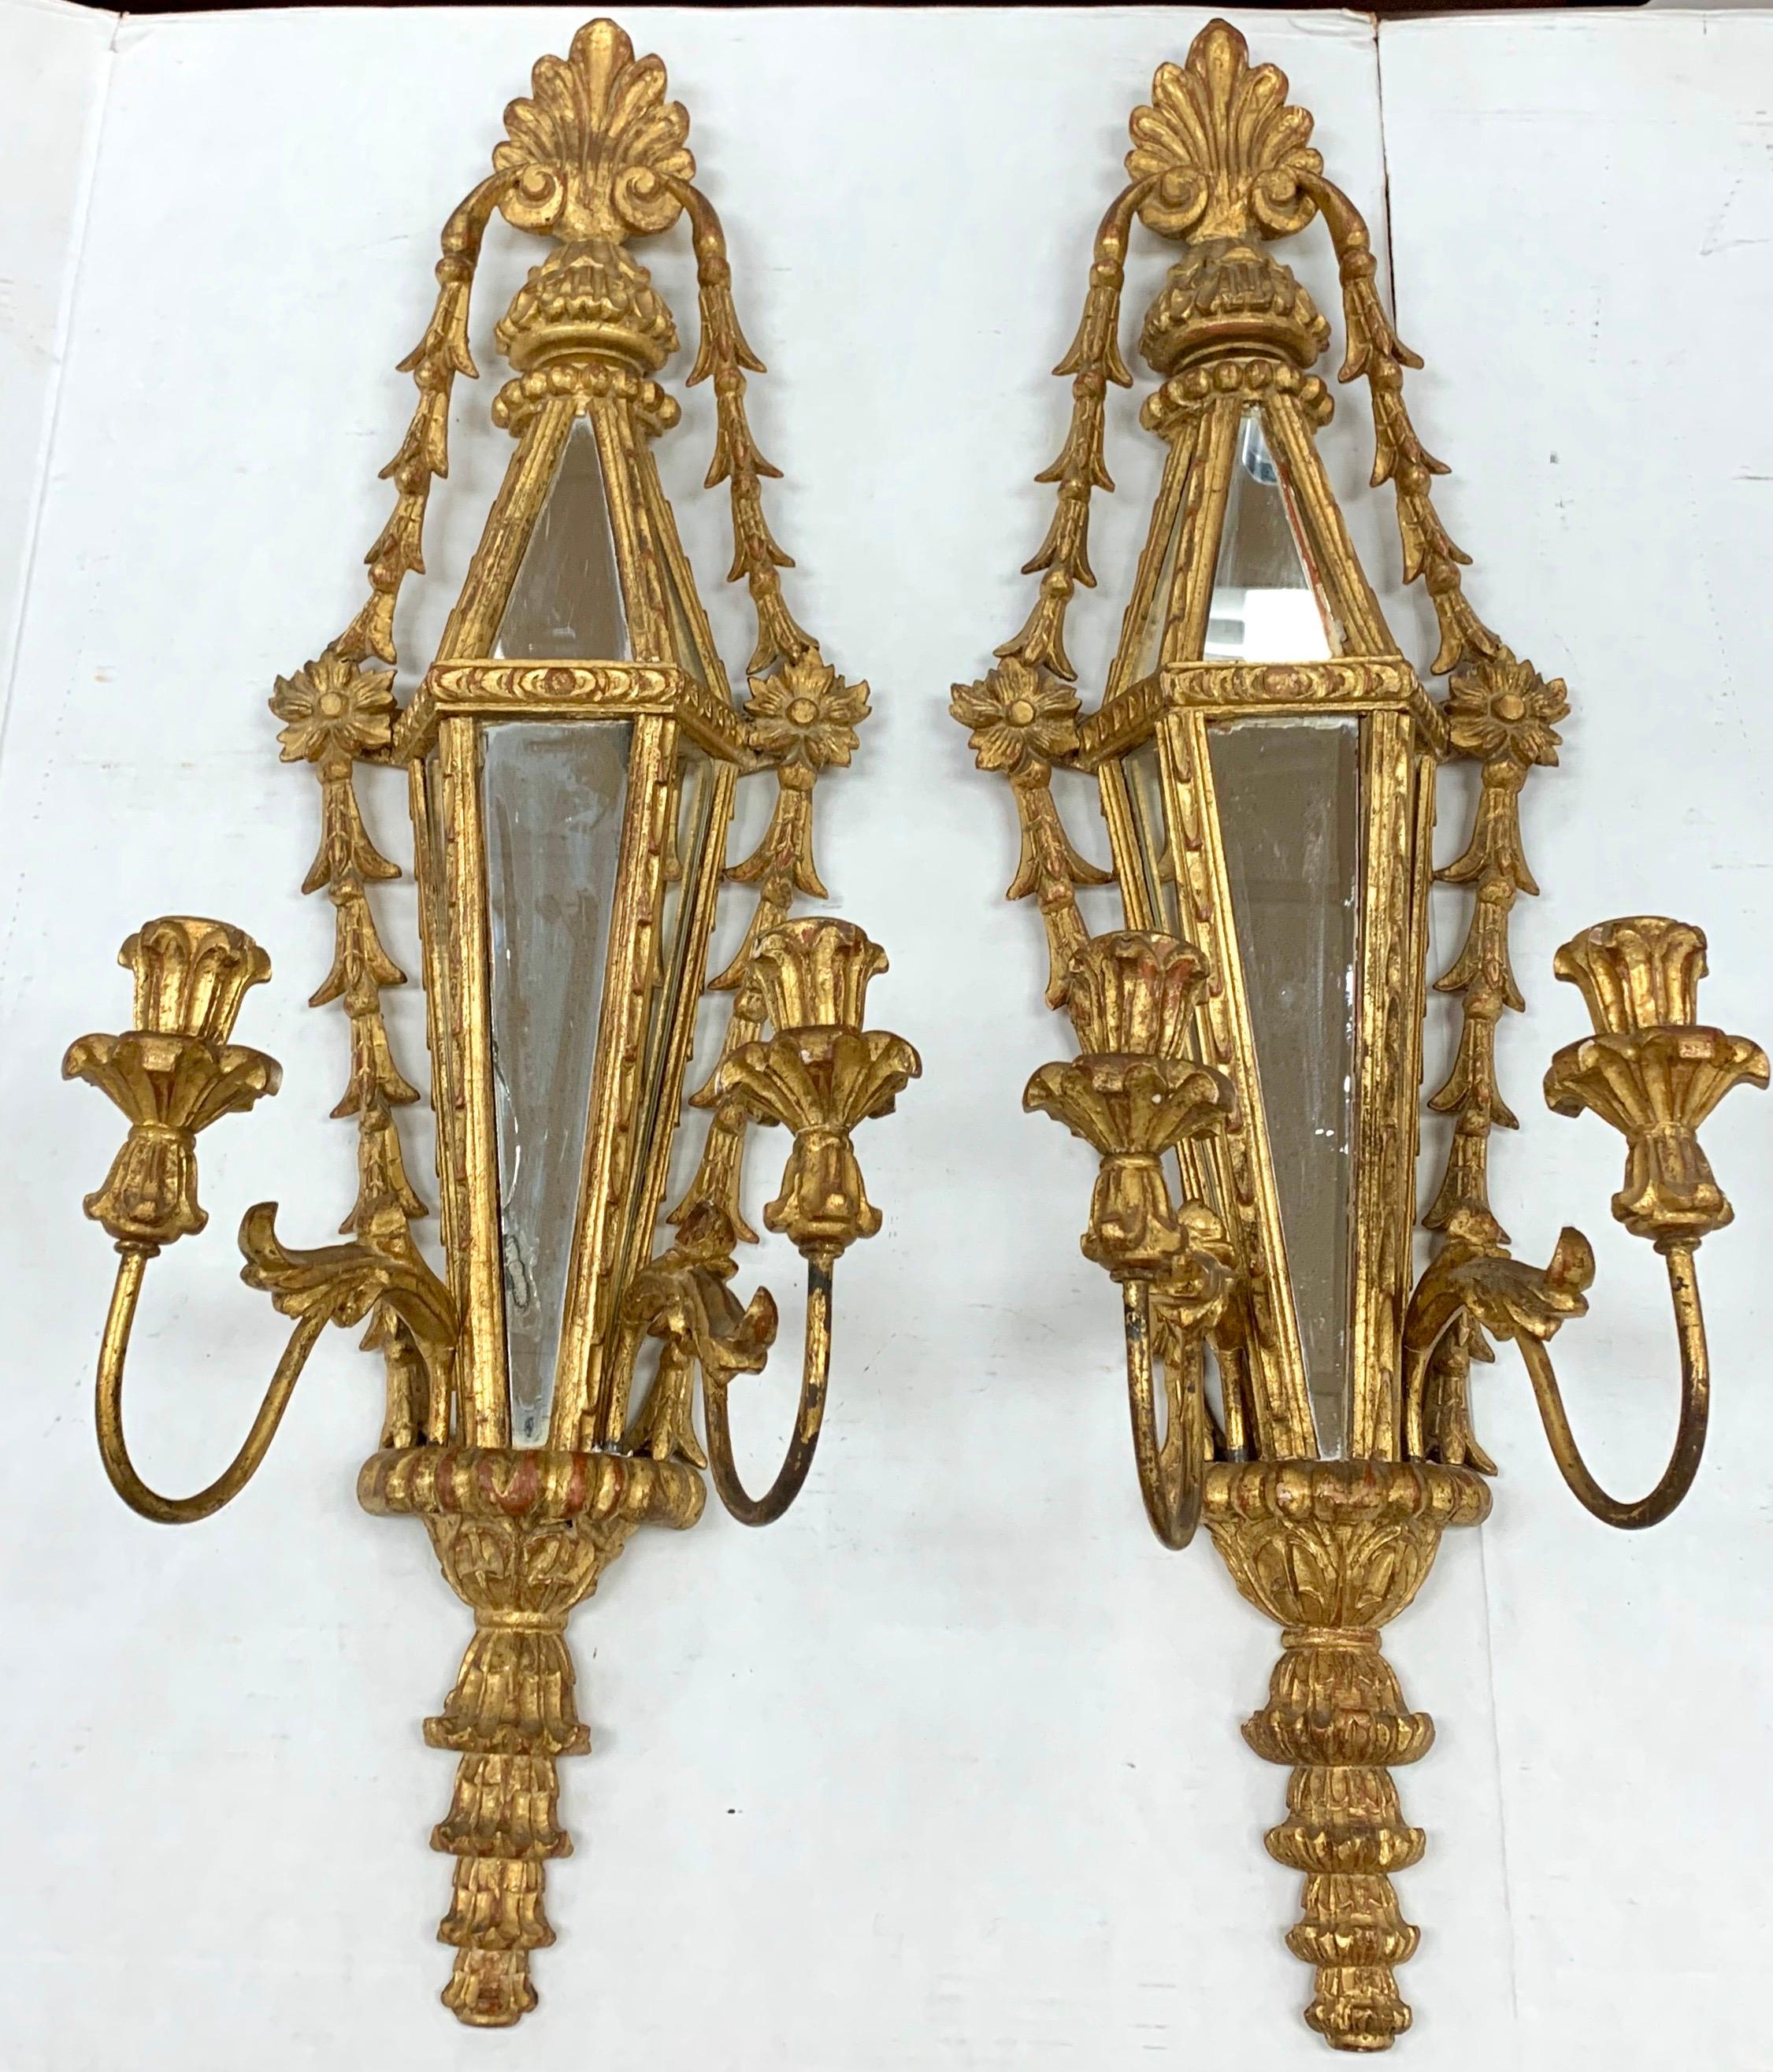 Lovely tall giltwood mirrored two arm candle sconces from Italy. Arms are detachable. Marked “Palladio Handcarved in Italy”. Beautiful details and patina.